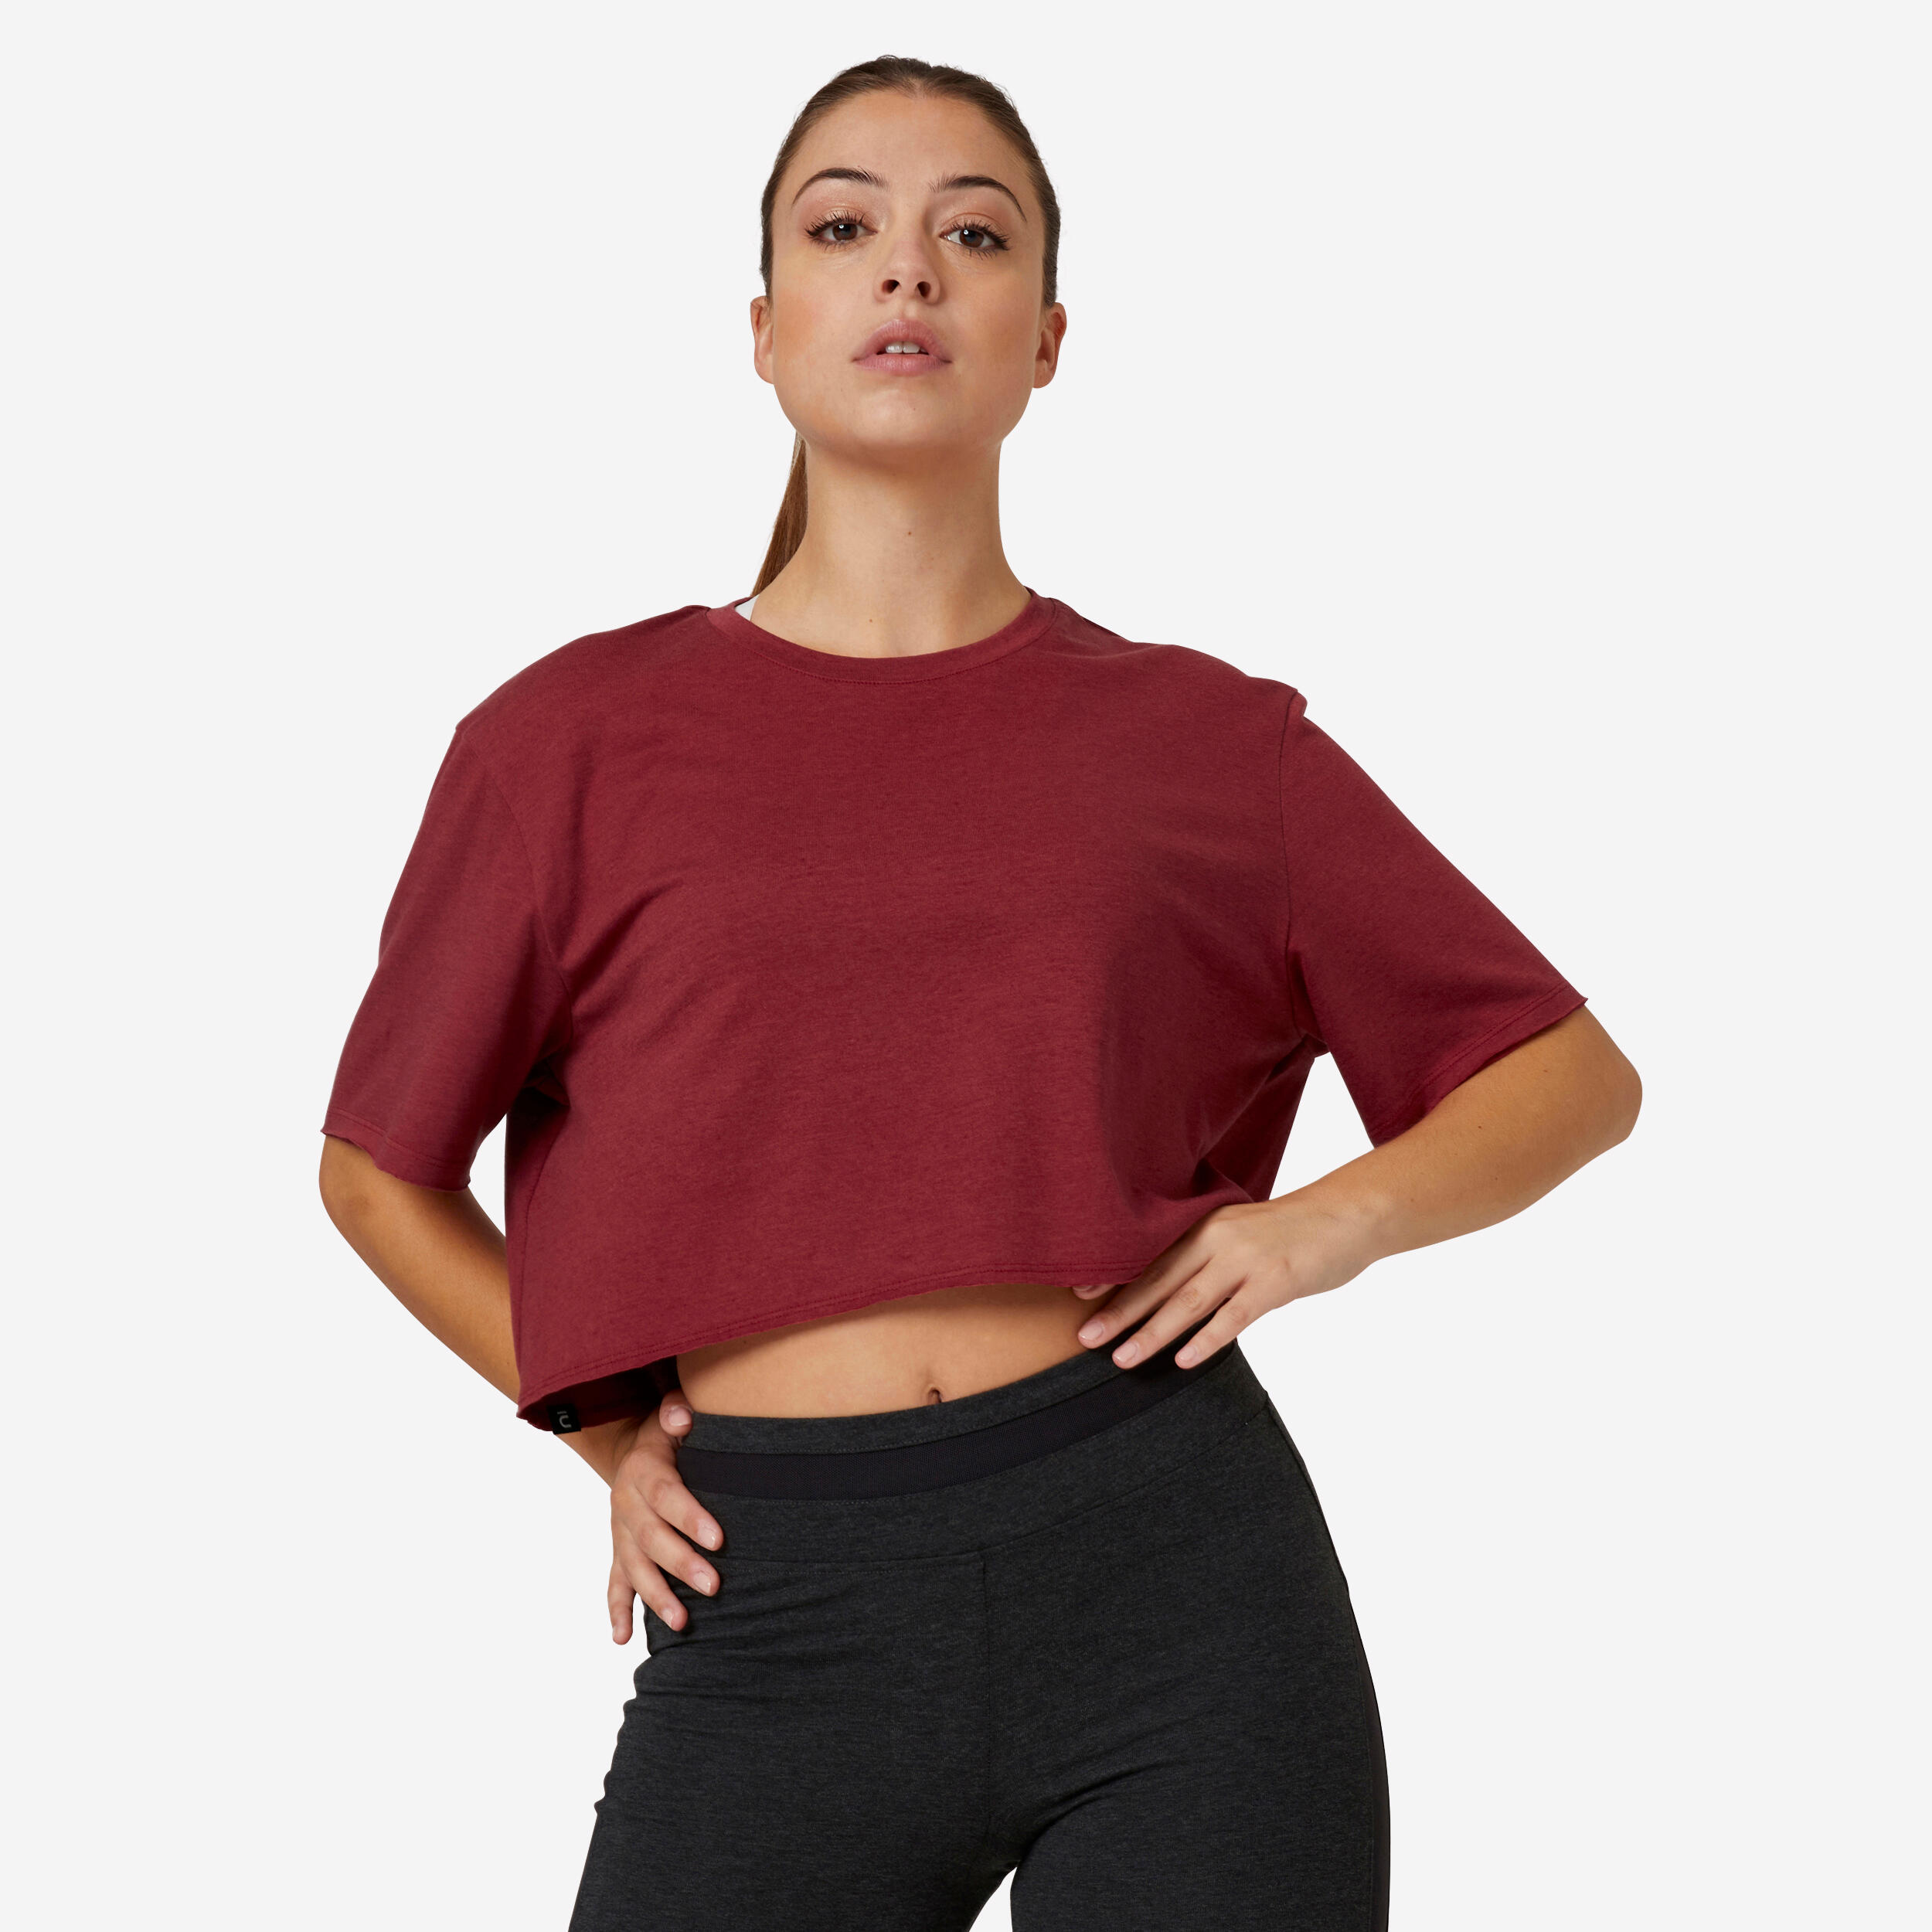 Women's Cropped Fitness T-Shirt 520 - Beetroot Red 1/7